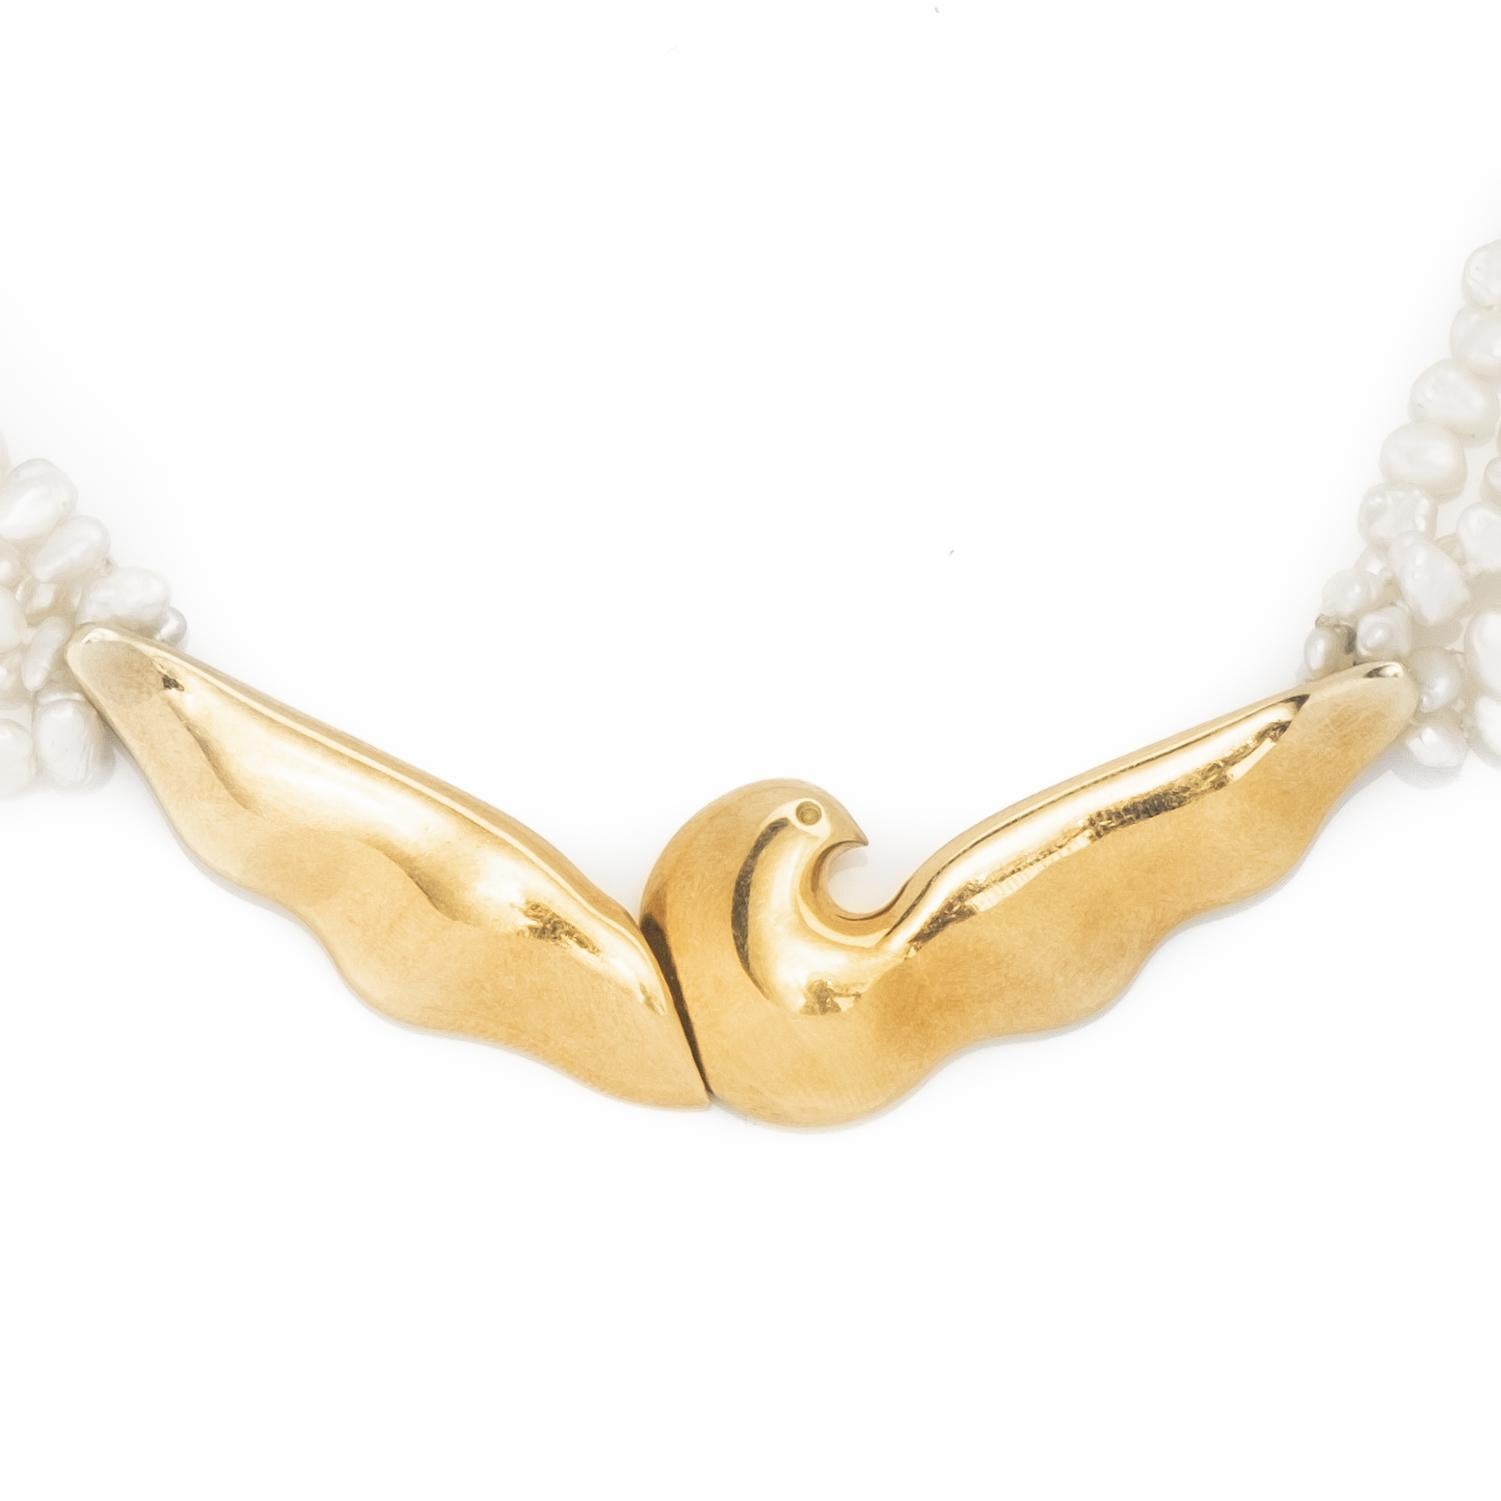 tiffany paloma picasso pearl necklace